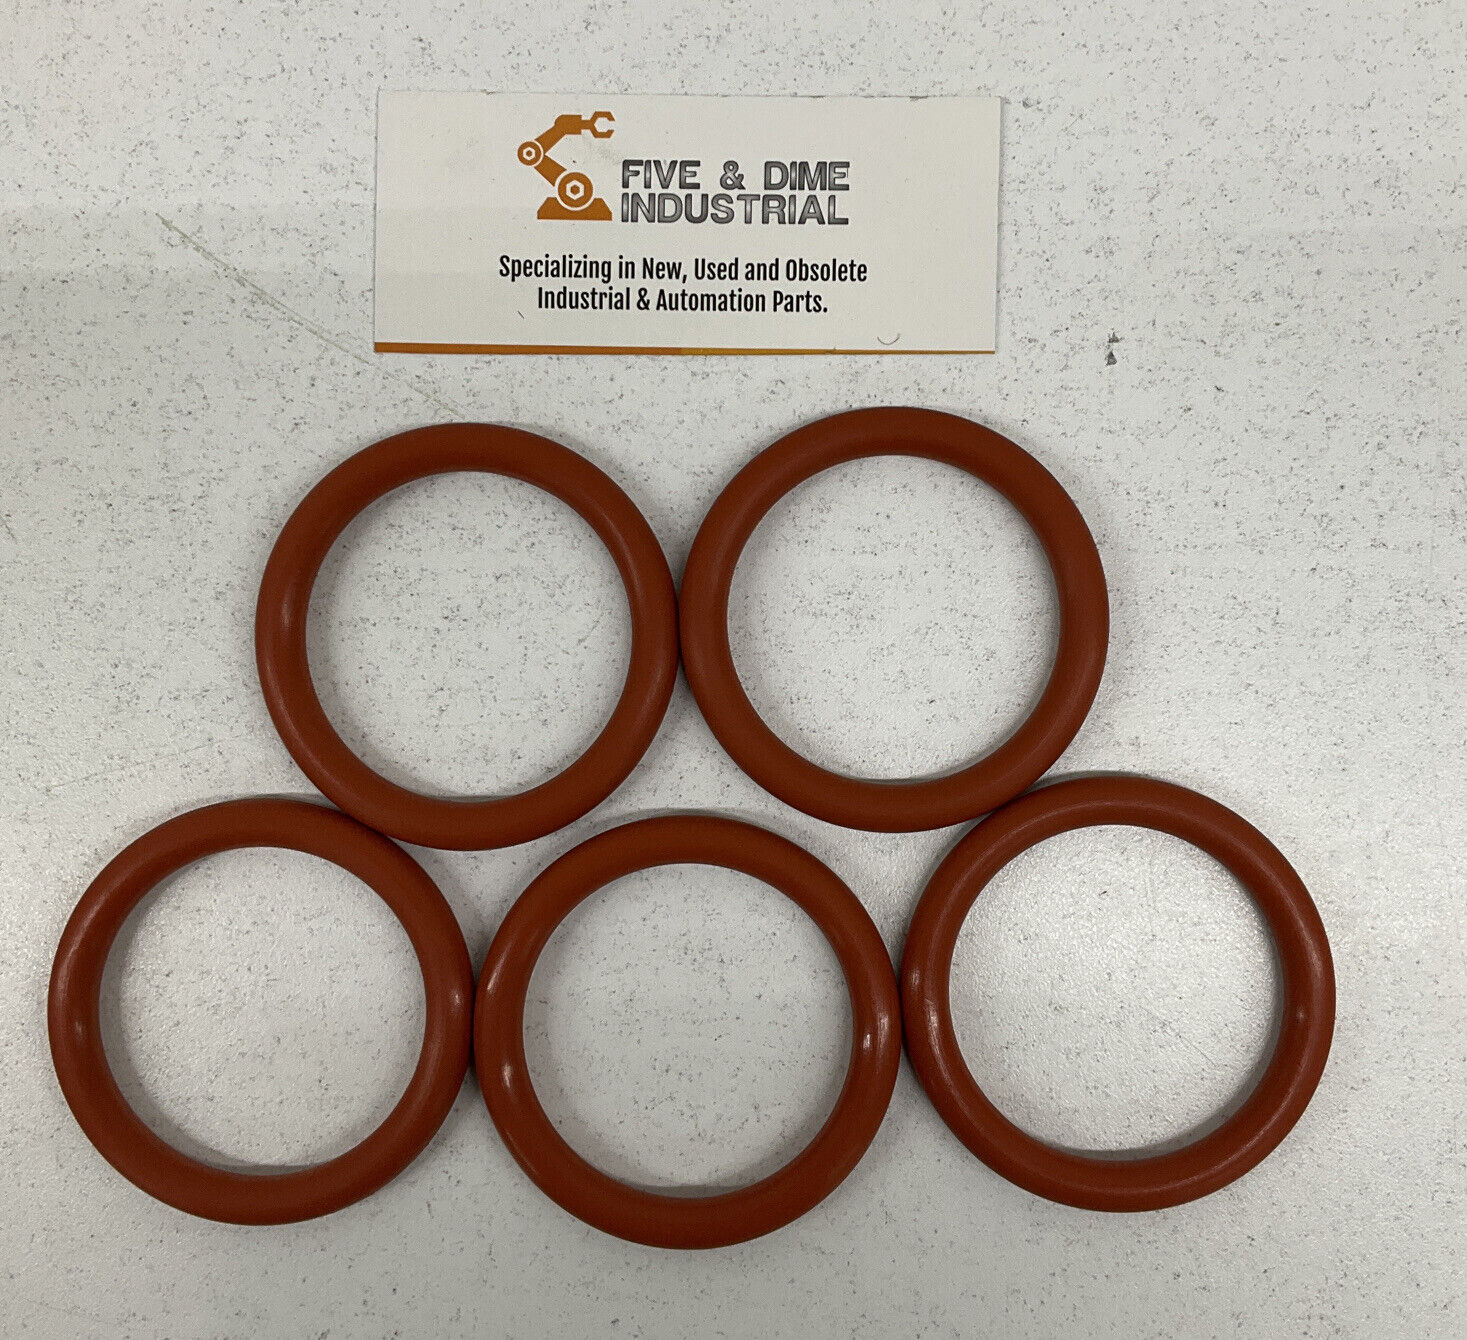 Parker S1138 5-981 Dash No. -404 Silicone O-Ring 5 Per Pack (BK129)